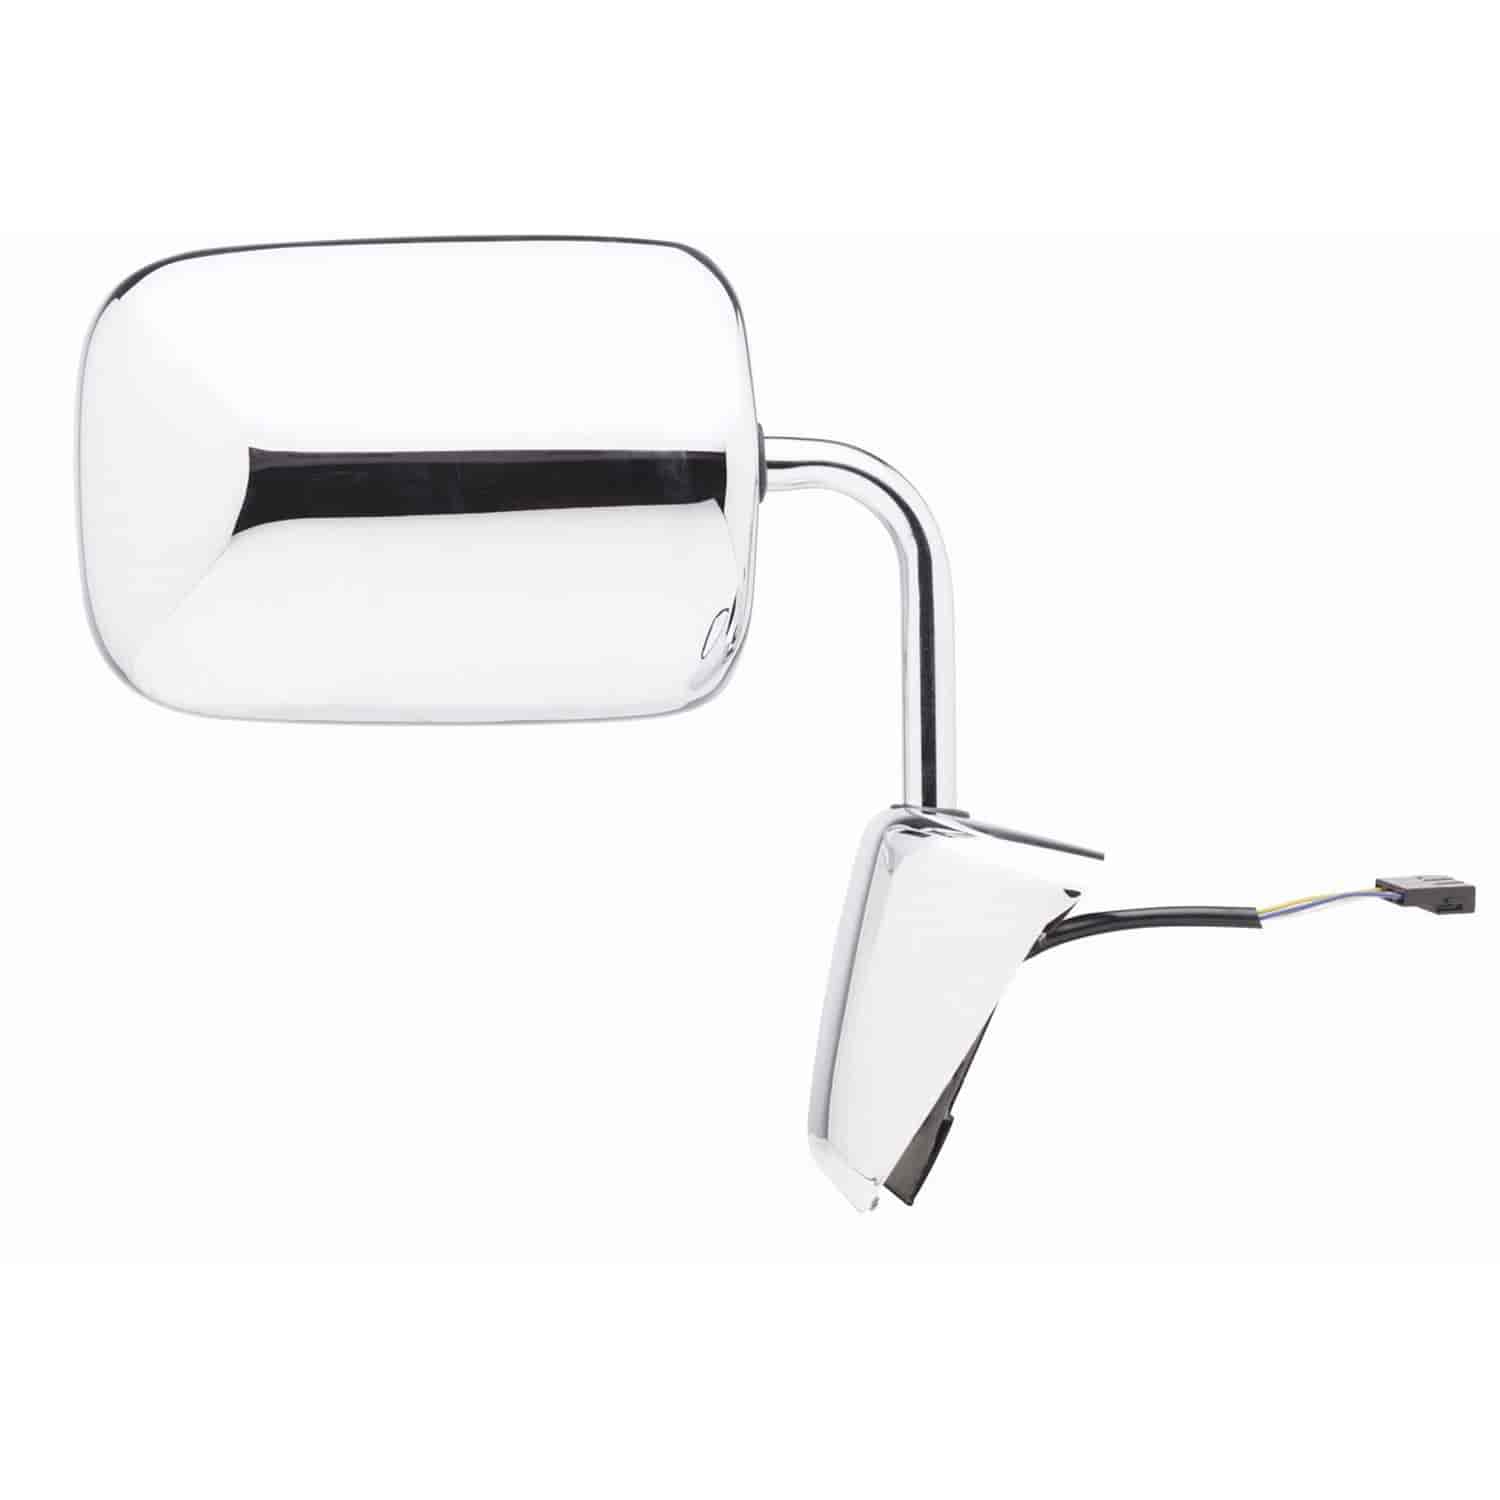 OEM Style Replacement mirror for 88-93 Dodge Pick